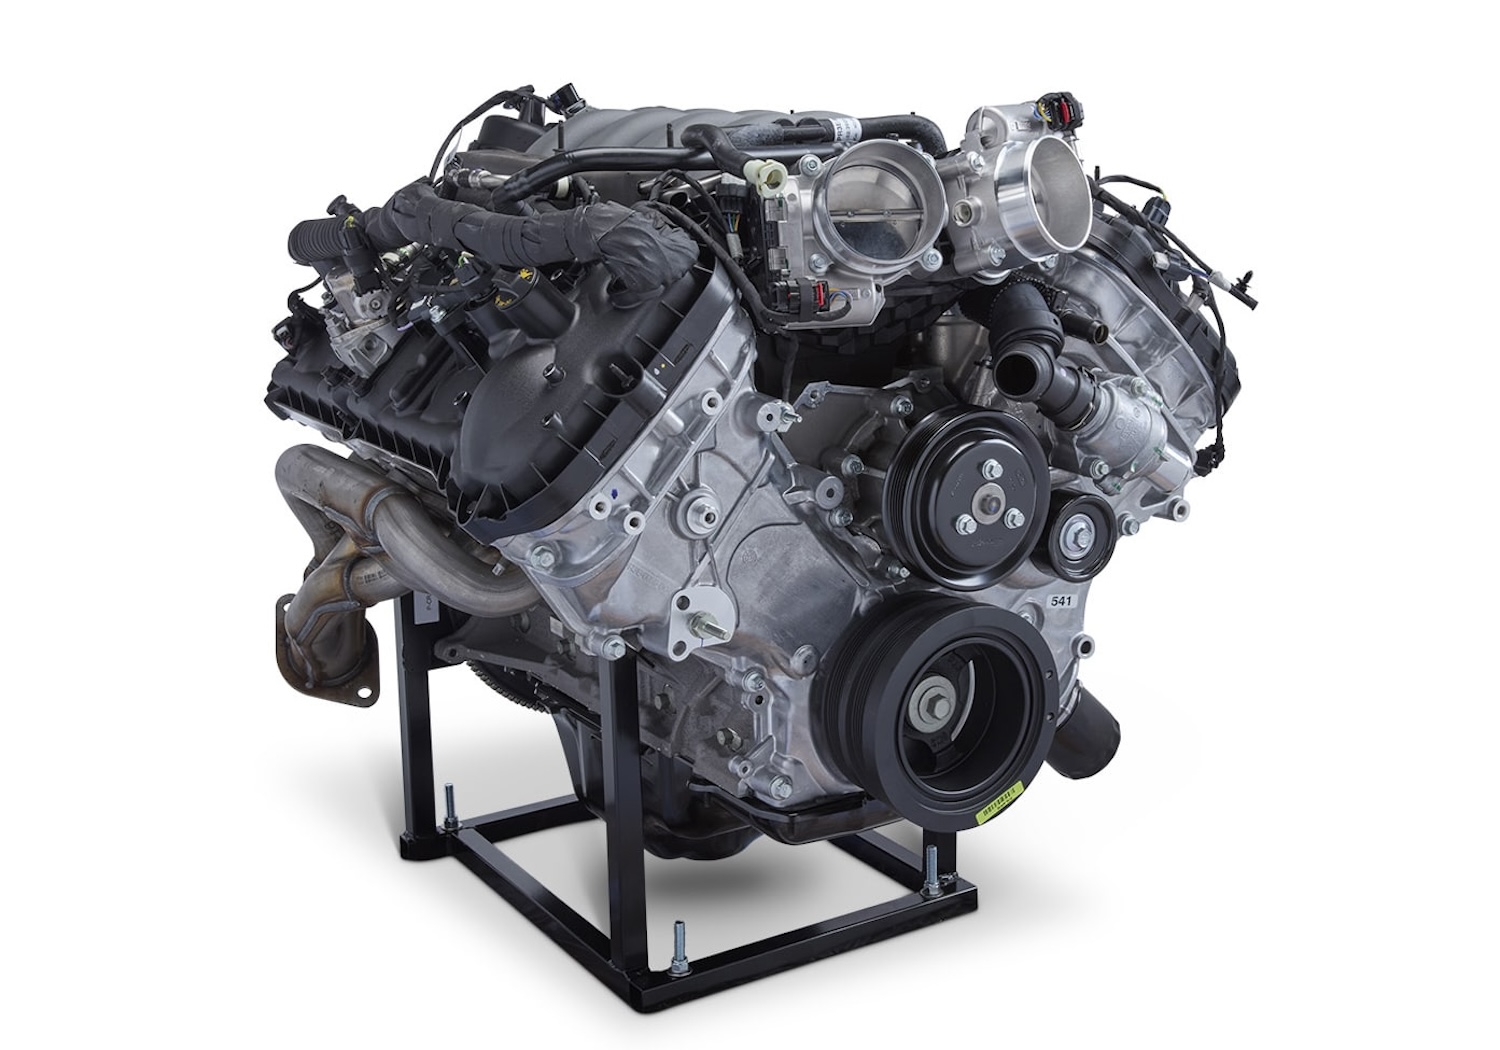 New Gen 4 Ford 5.0L V8 Coyote Crate Engines Revealed